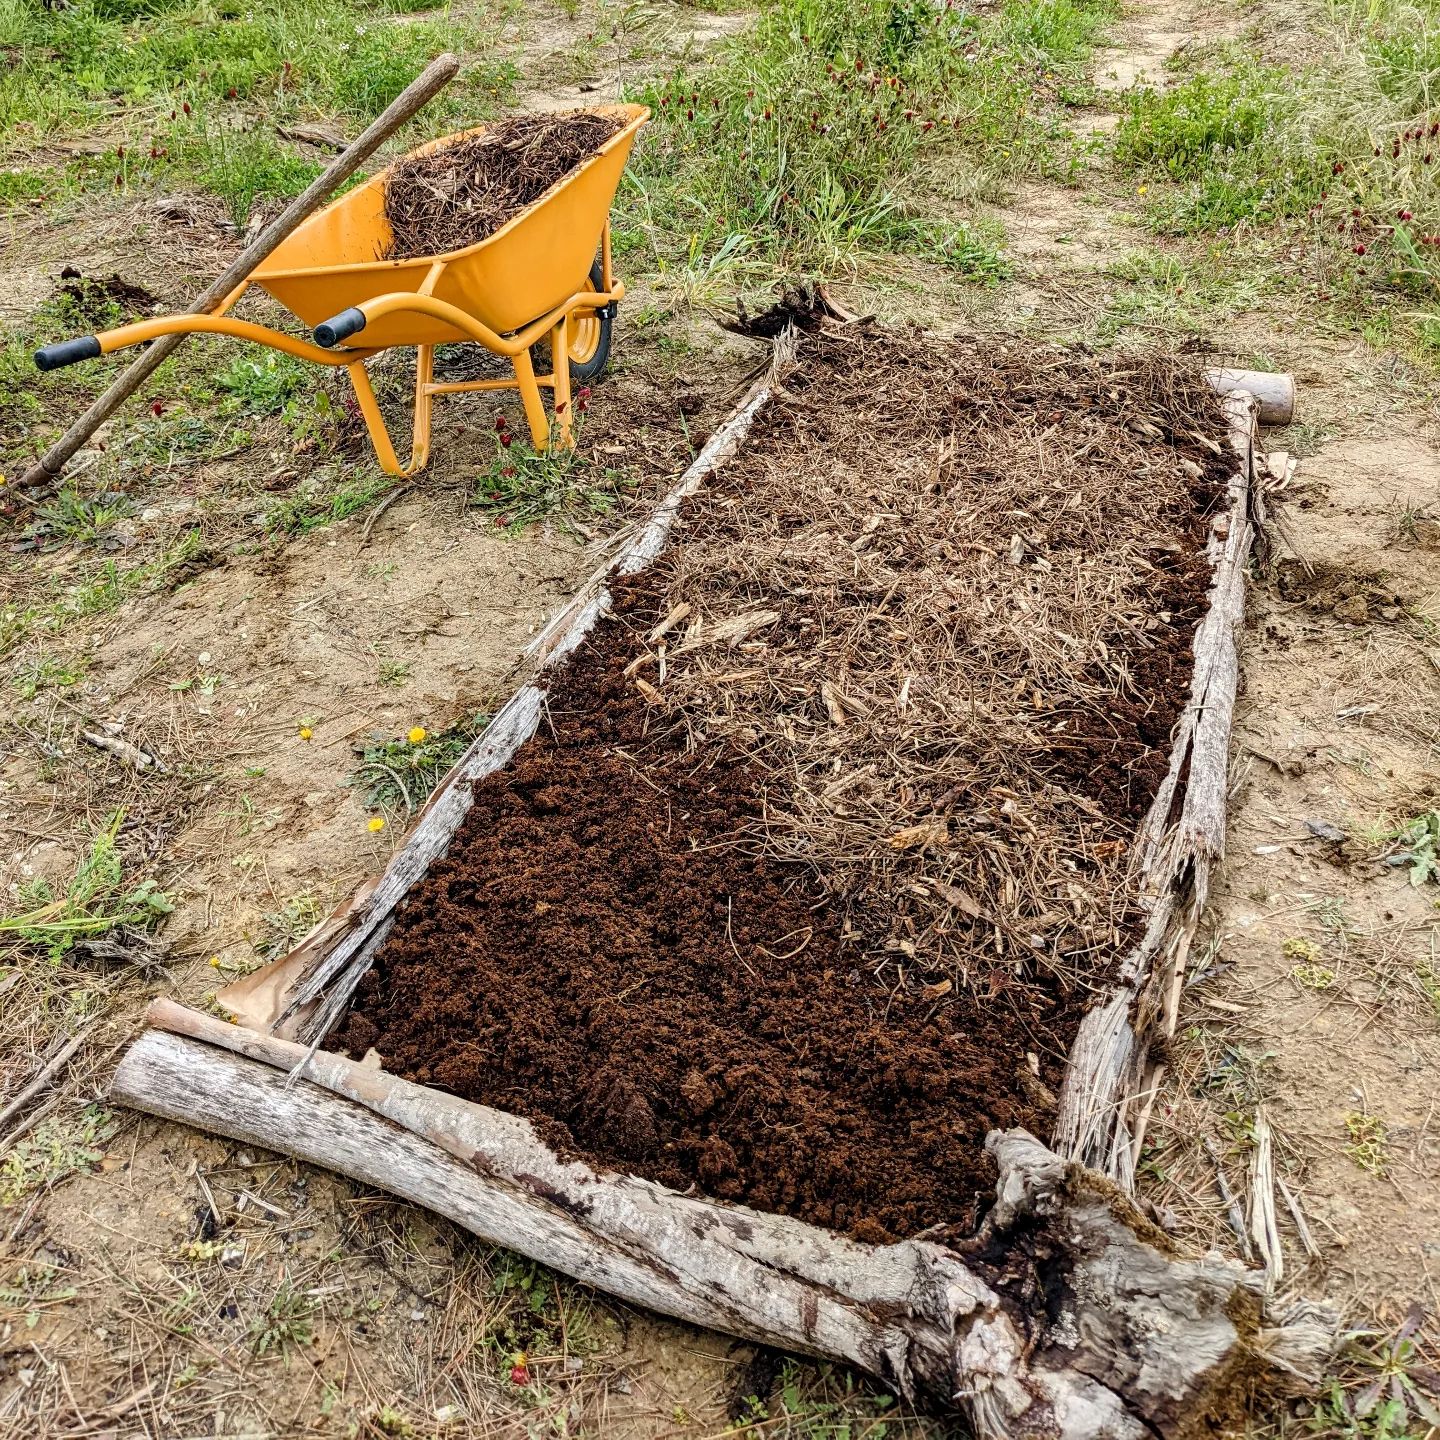 New lasagna bed: reclaimed packing paper on top of the grass and weeds, topped with composted cow manure and mulched with shredded pine branches